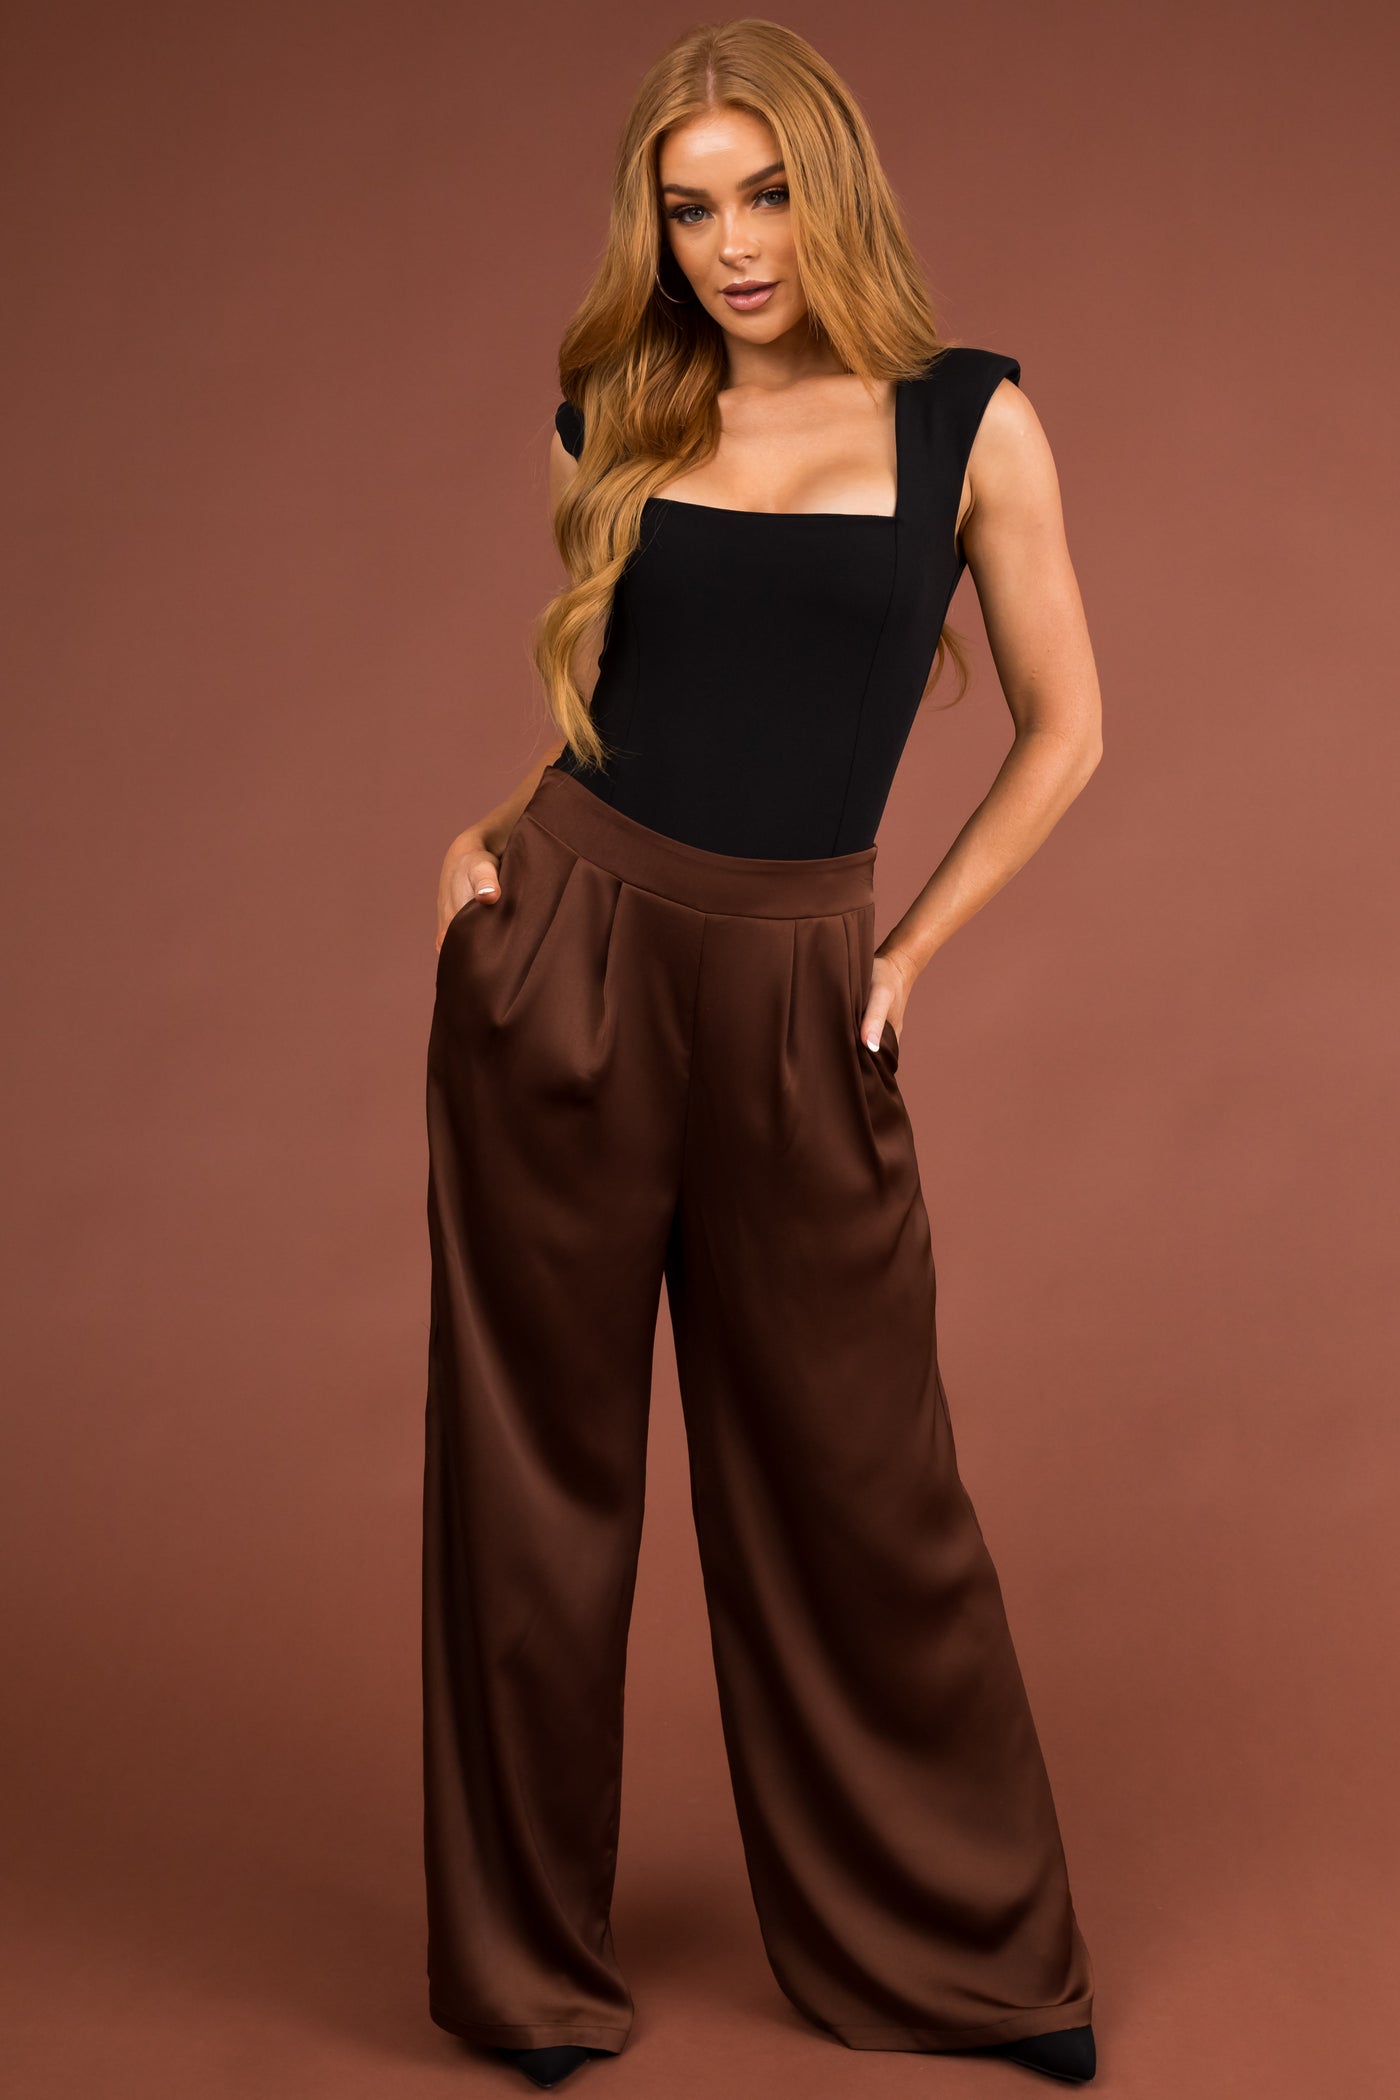 Ladies Velvet Trousers Elasticated High Waisted Pull On Palazzo